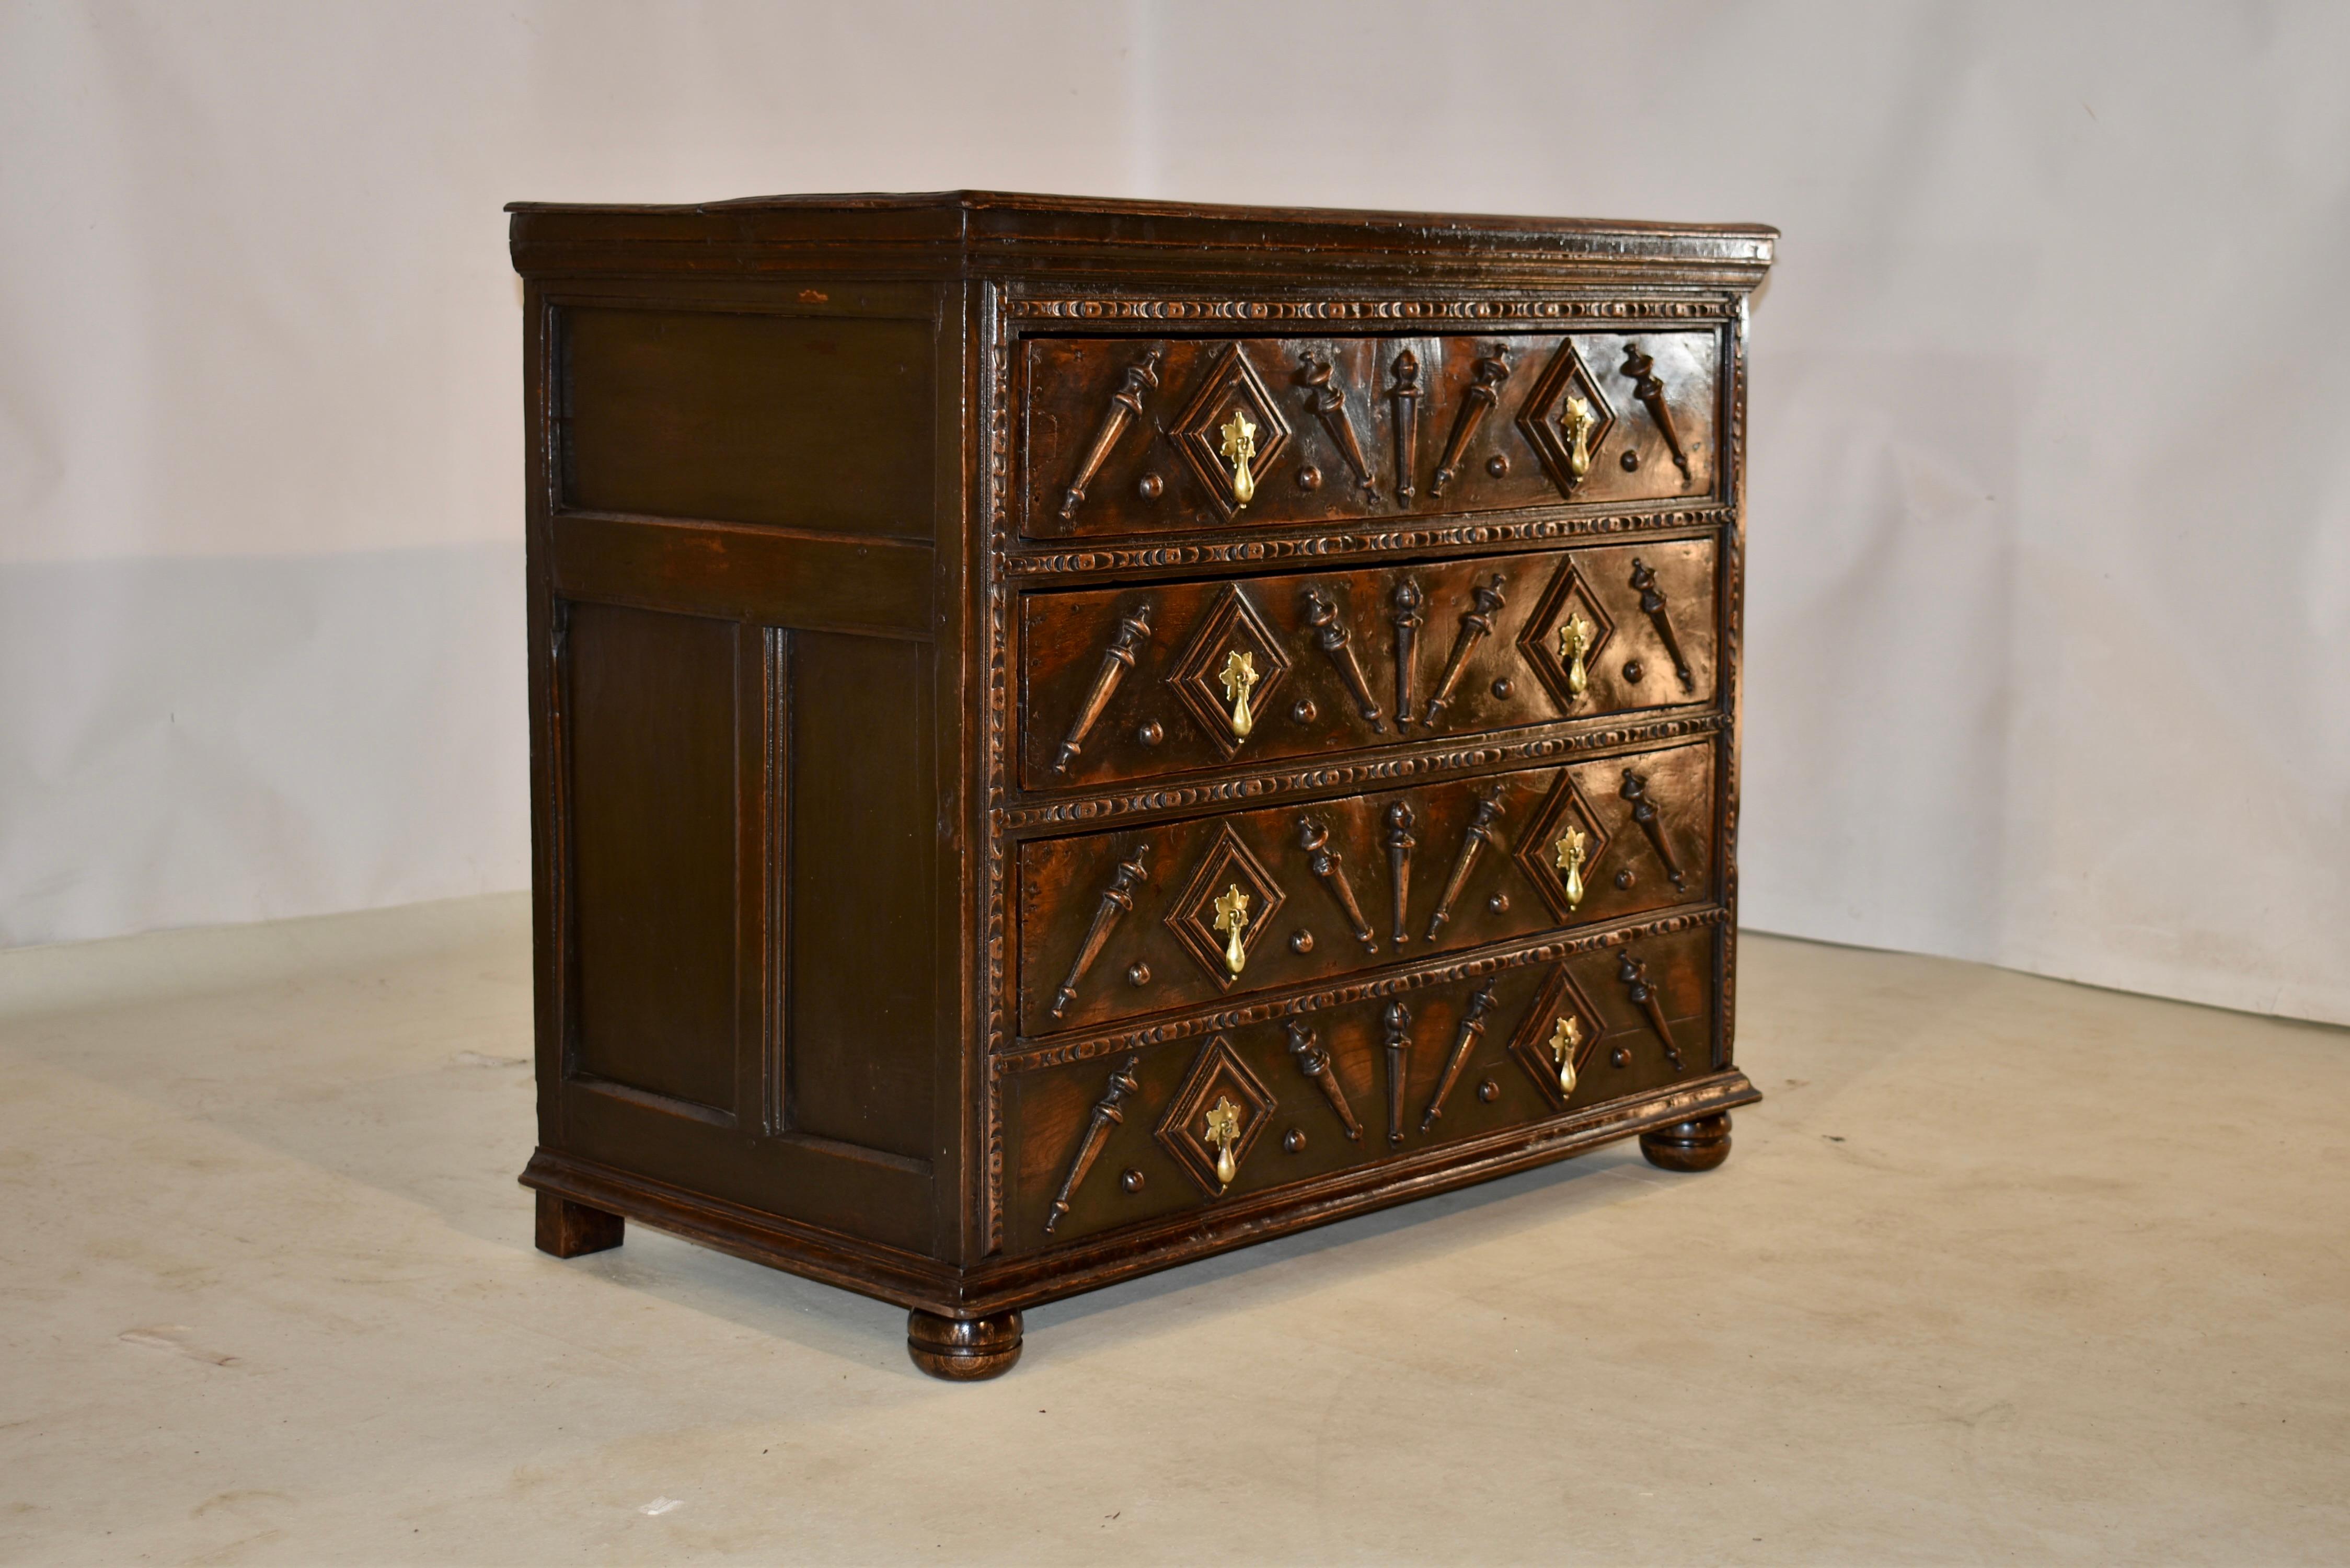 17th century period Charles II chest of drawers from England made from oak. The top is made from two planks and has a beveled edge, following down to hand paneled sides and four drawers in the front. the drawer fronts are decorated with applied half